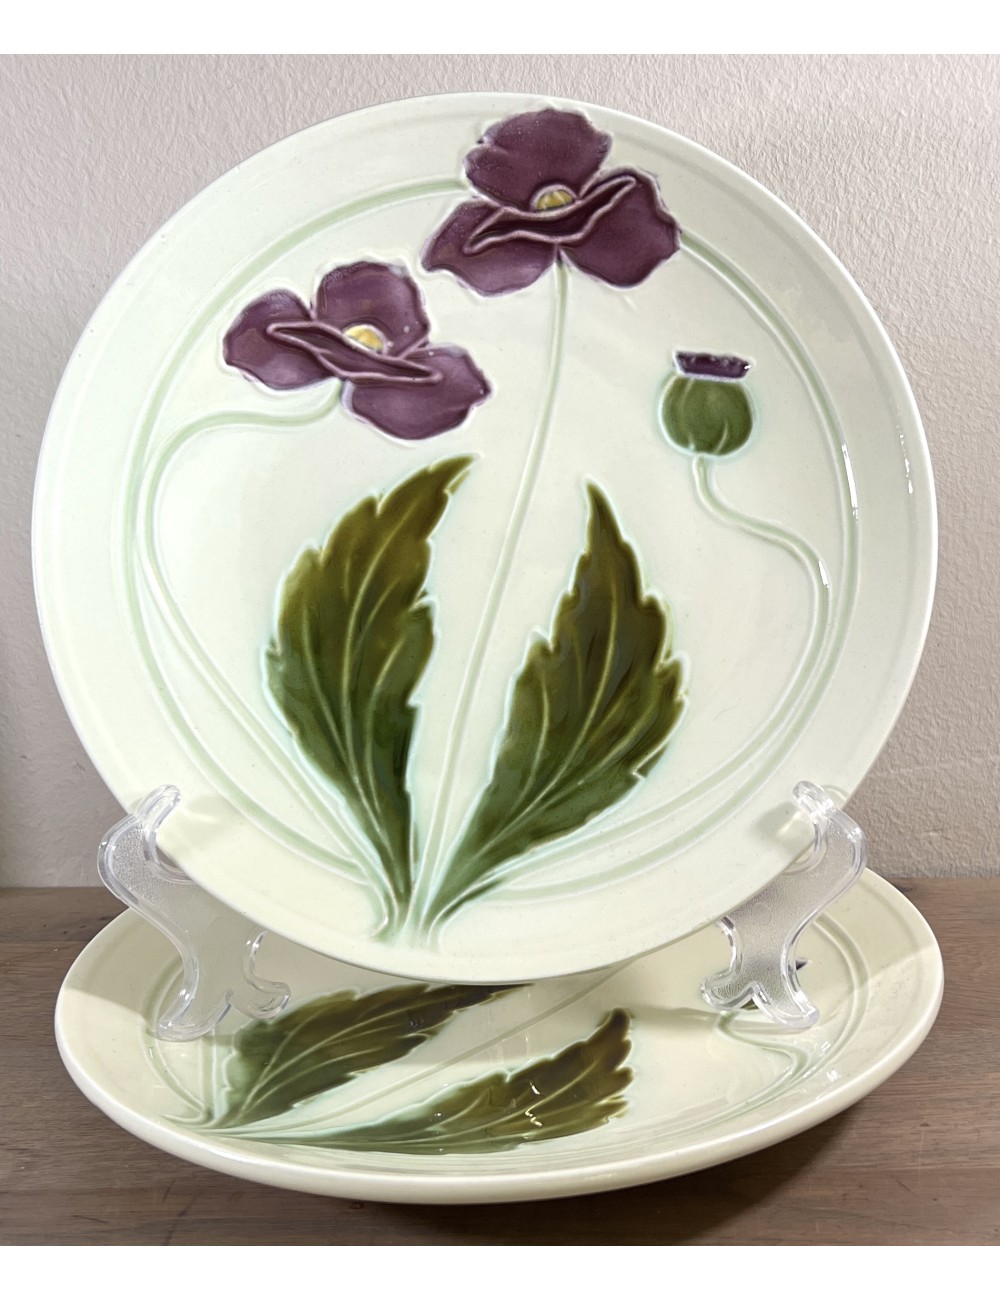 Decorative plate / Plate - unmarked - barbotine décor of purple/lilac poppies on light green background